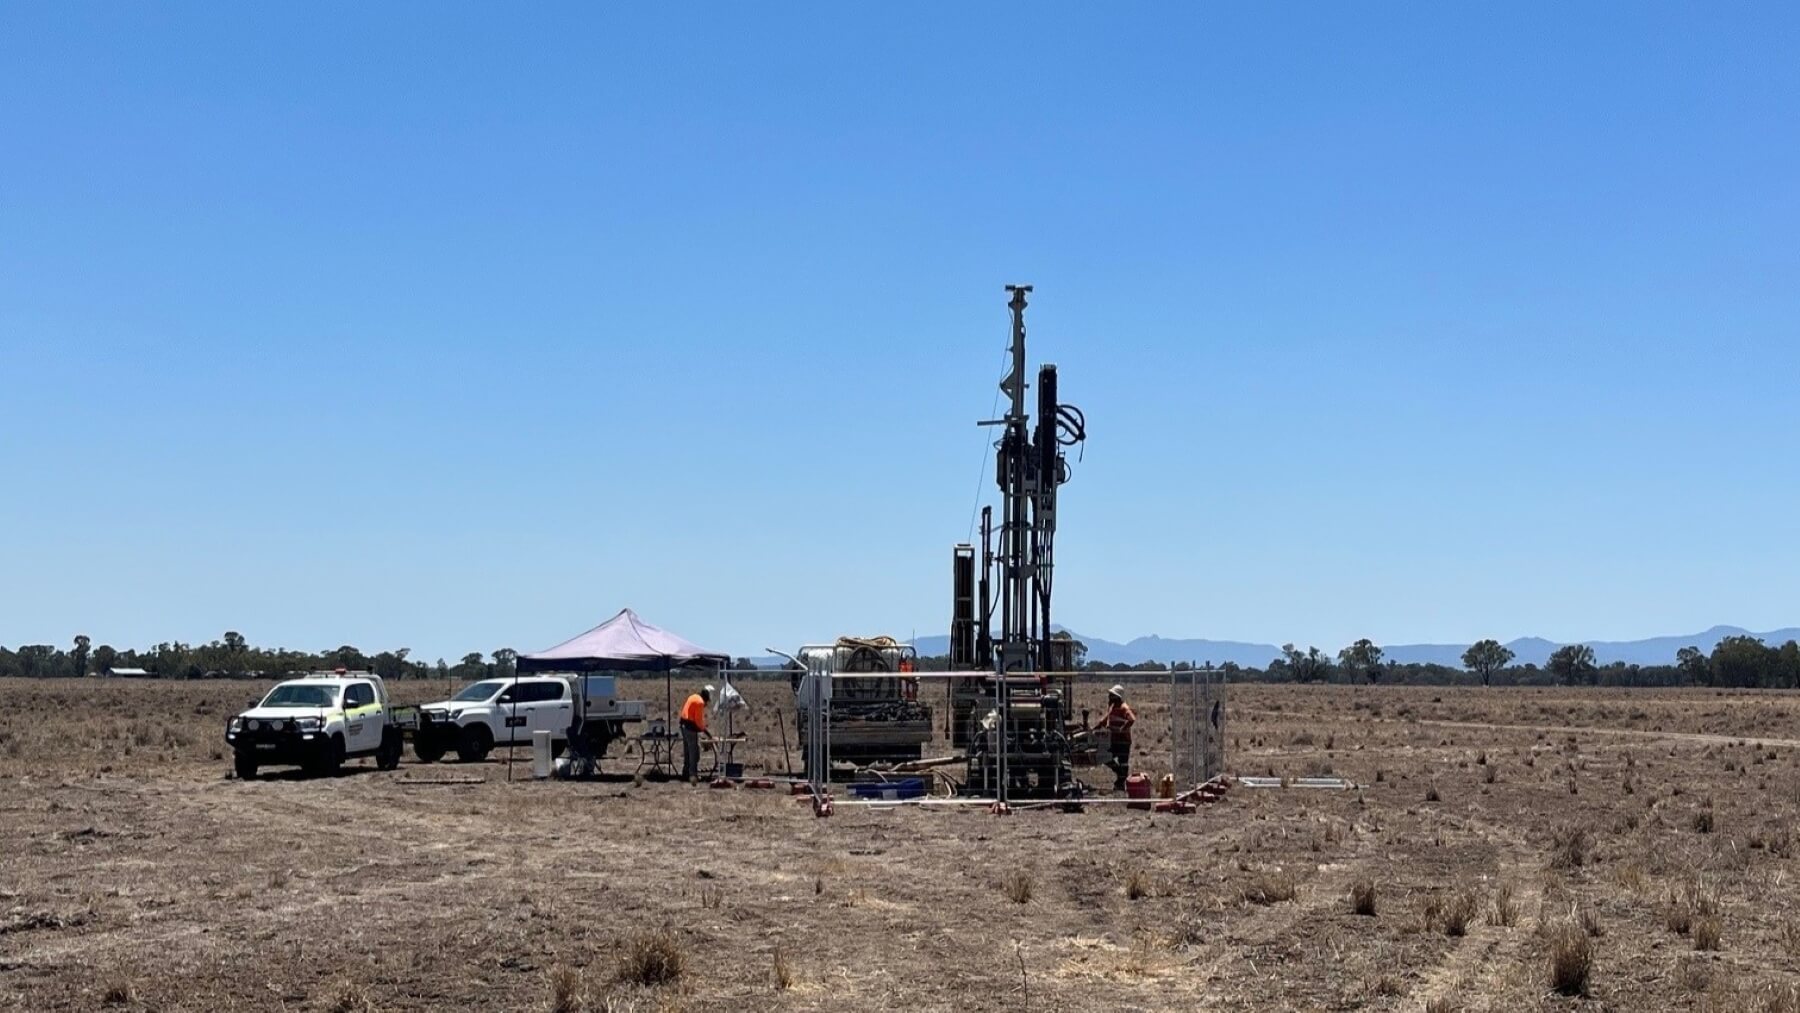 A drill rig operating in a field.